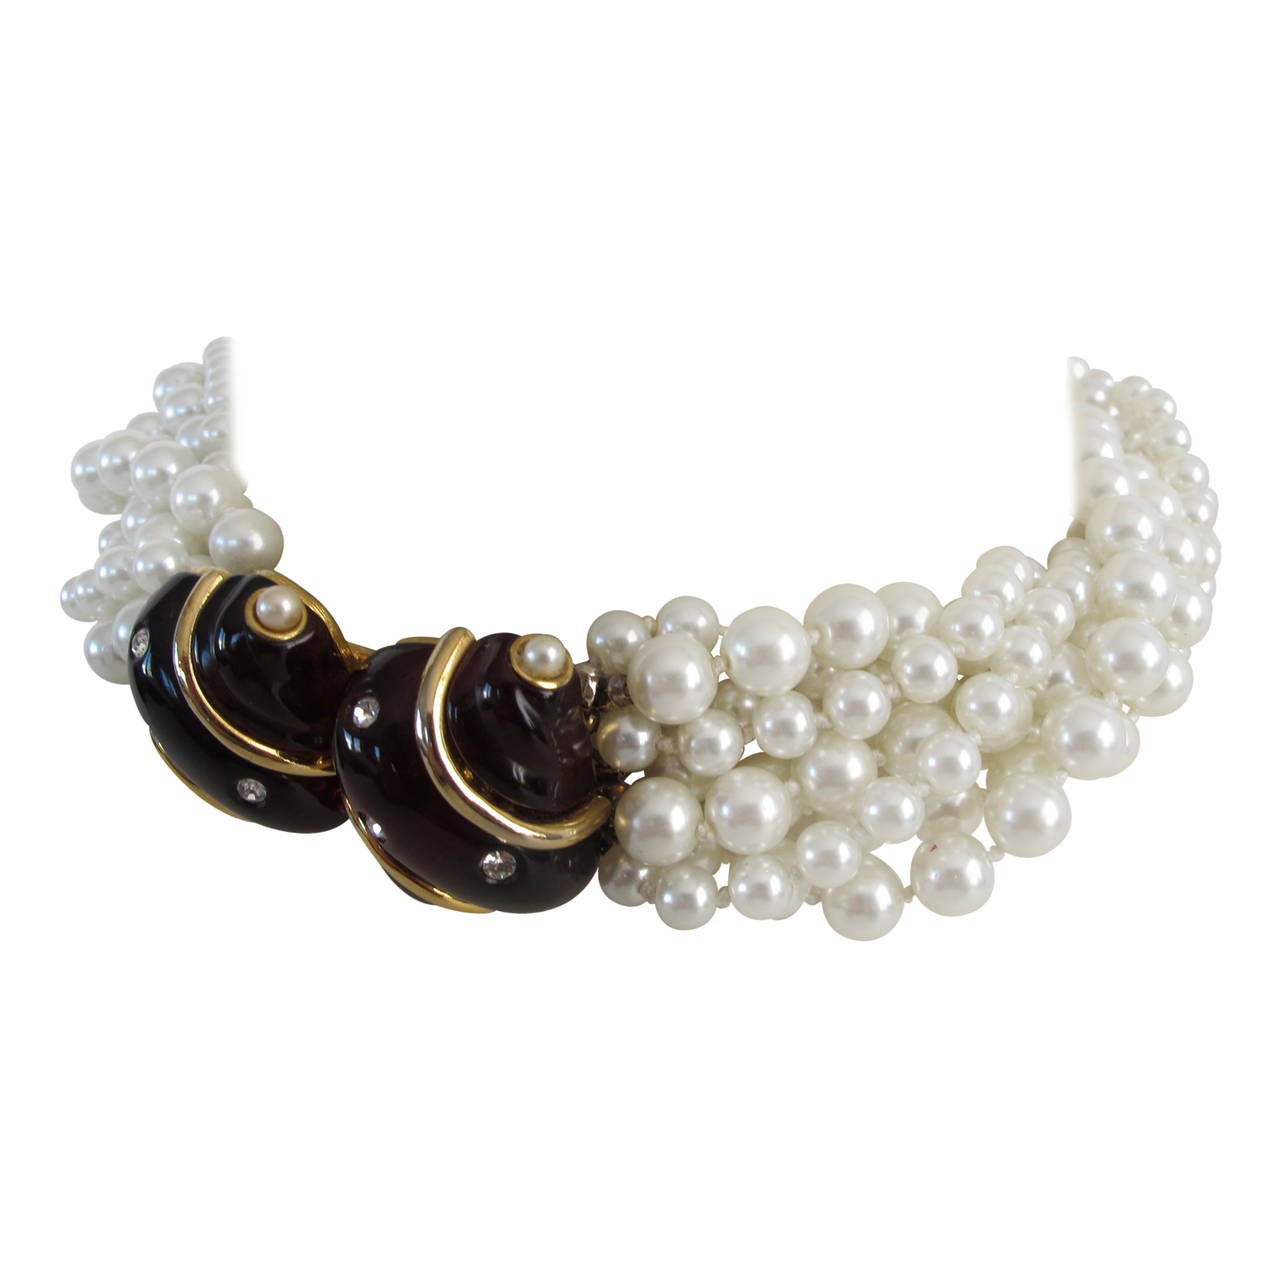 1960's Kenneth Jay Lane Multi-Strand Faux Pearl Necklace with Iconic Shell Clasp